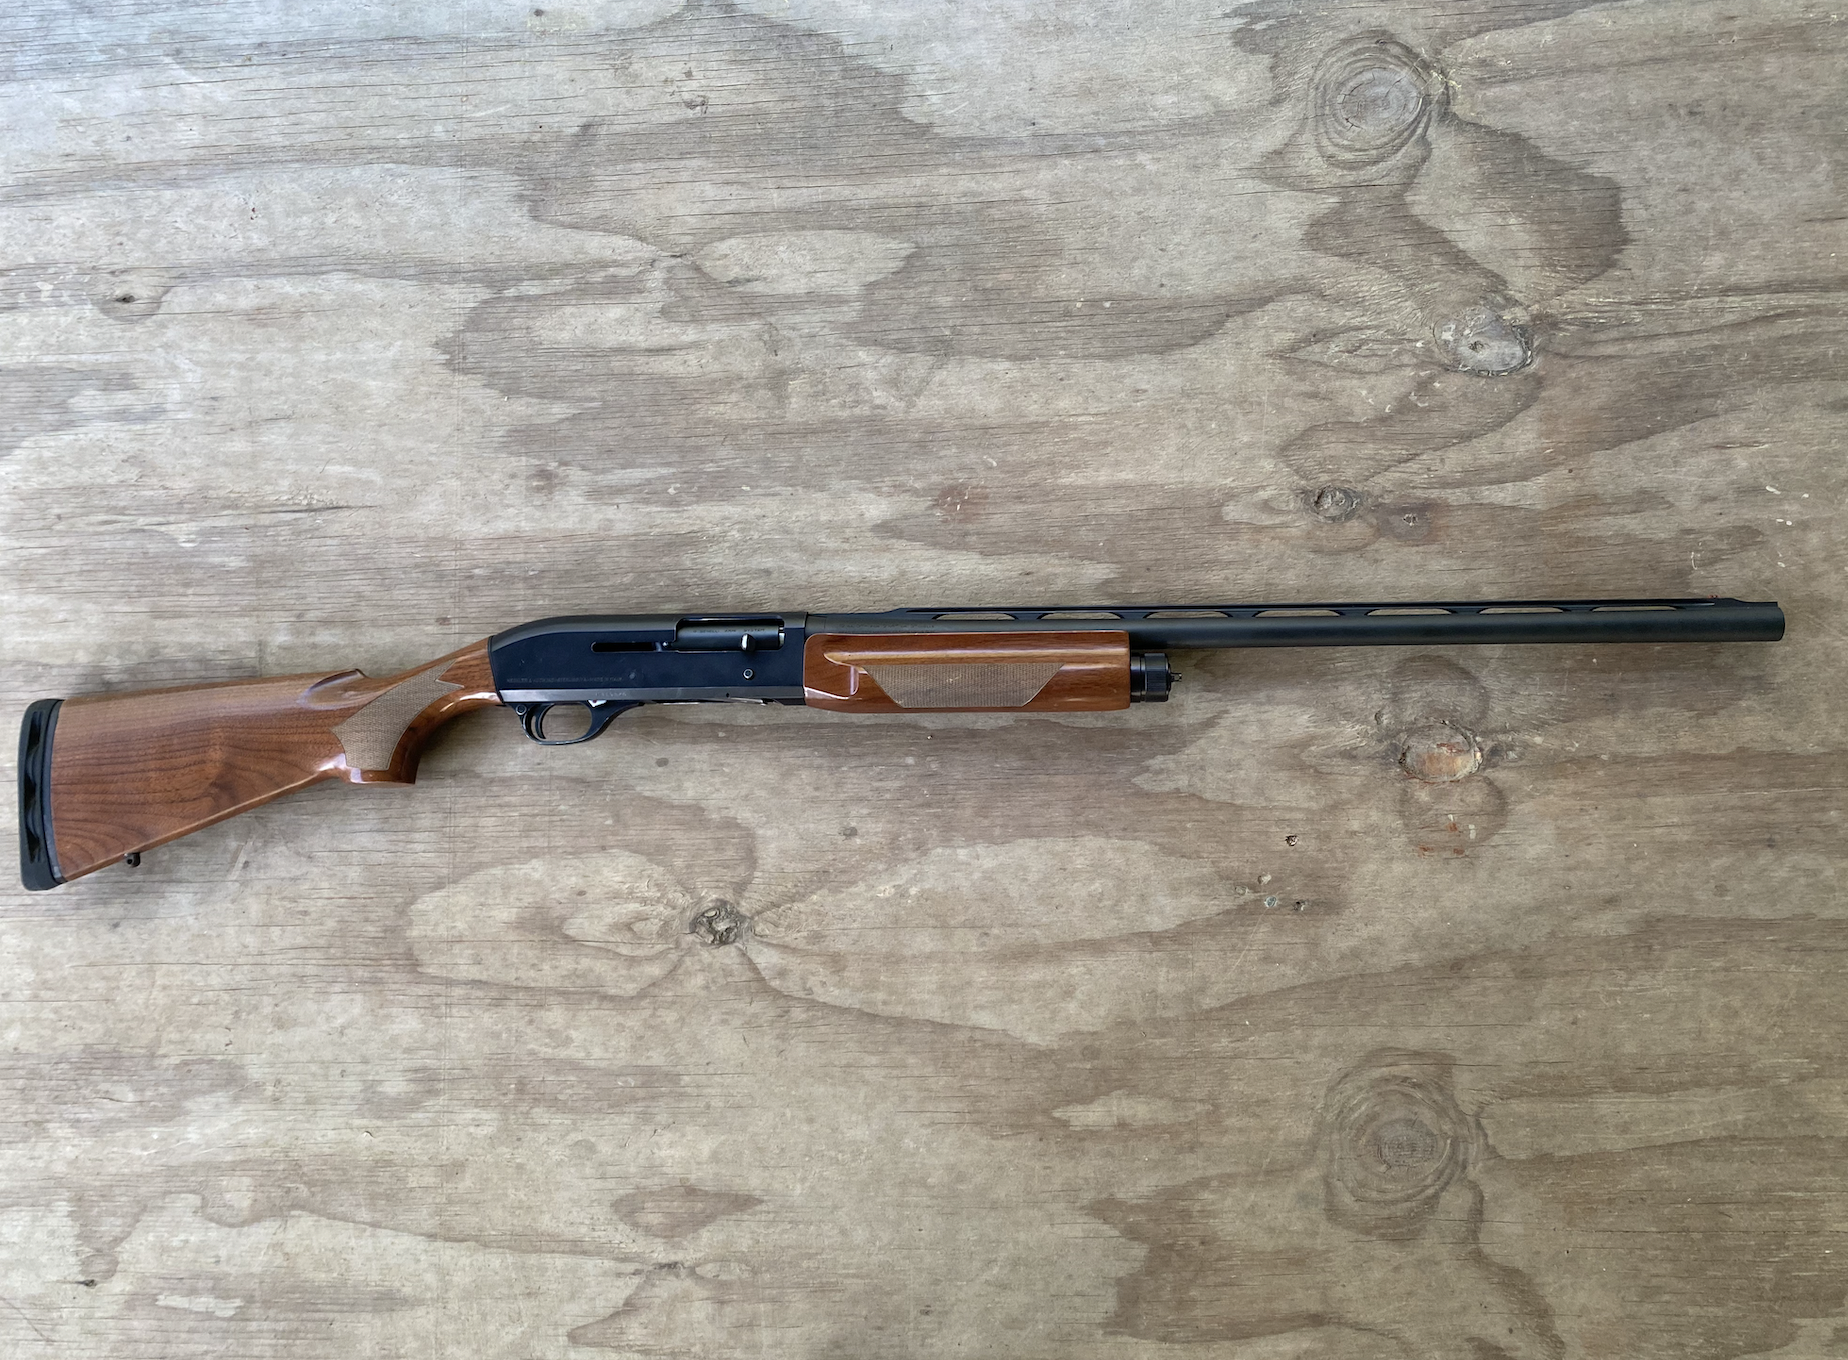 The Benelli M1 Super 90 was one of the best shotguns ever built.